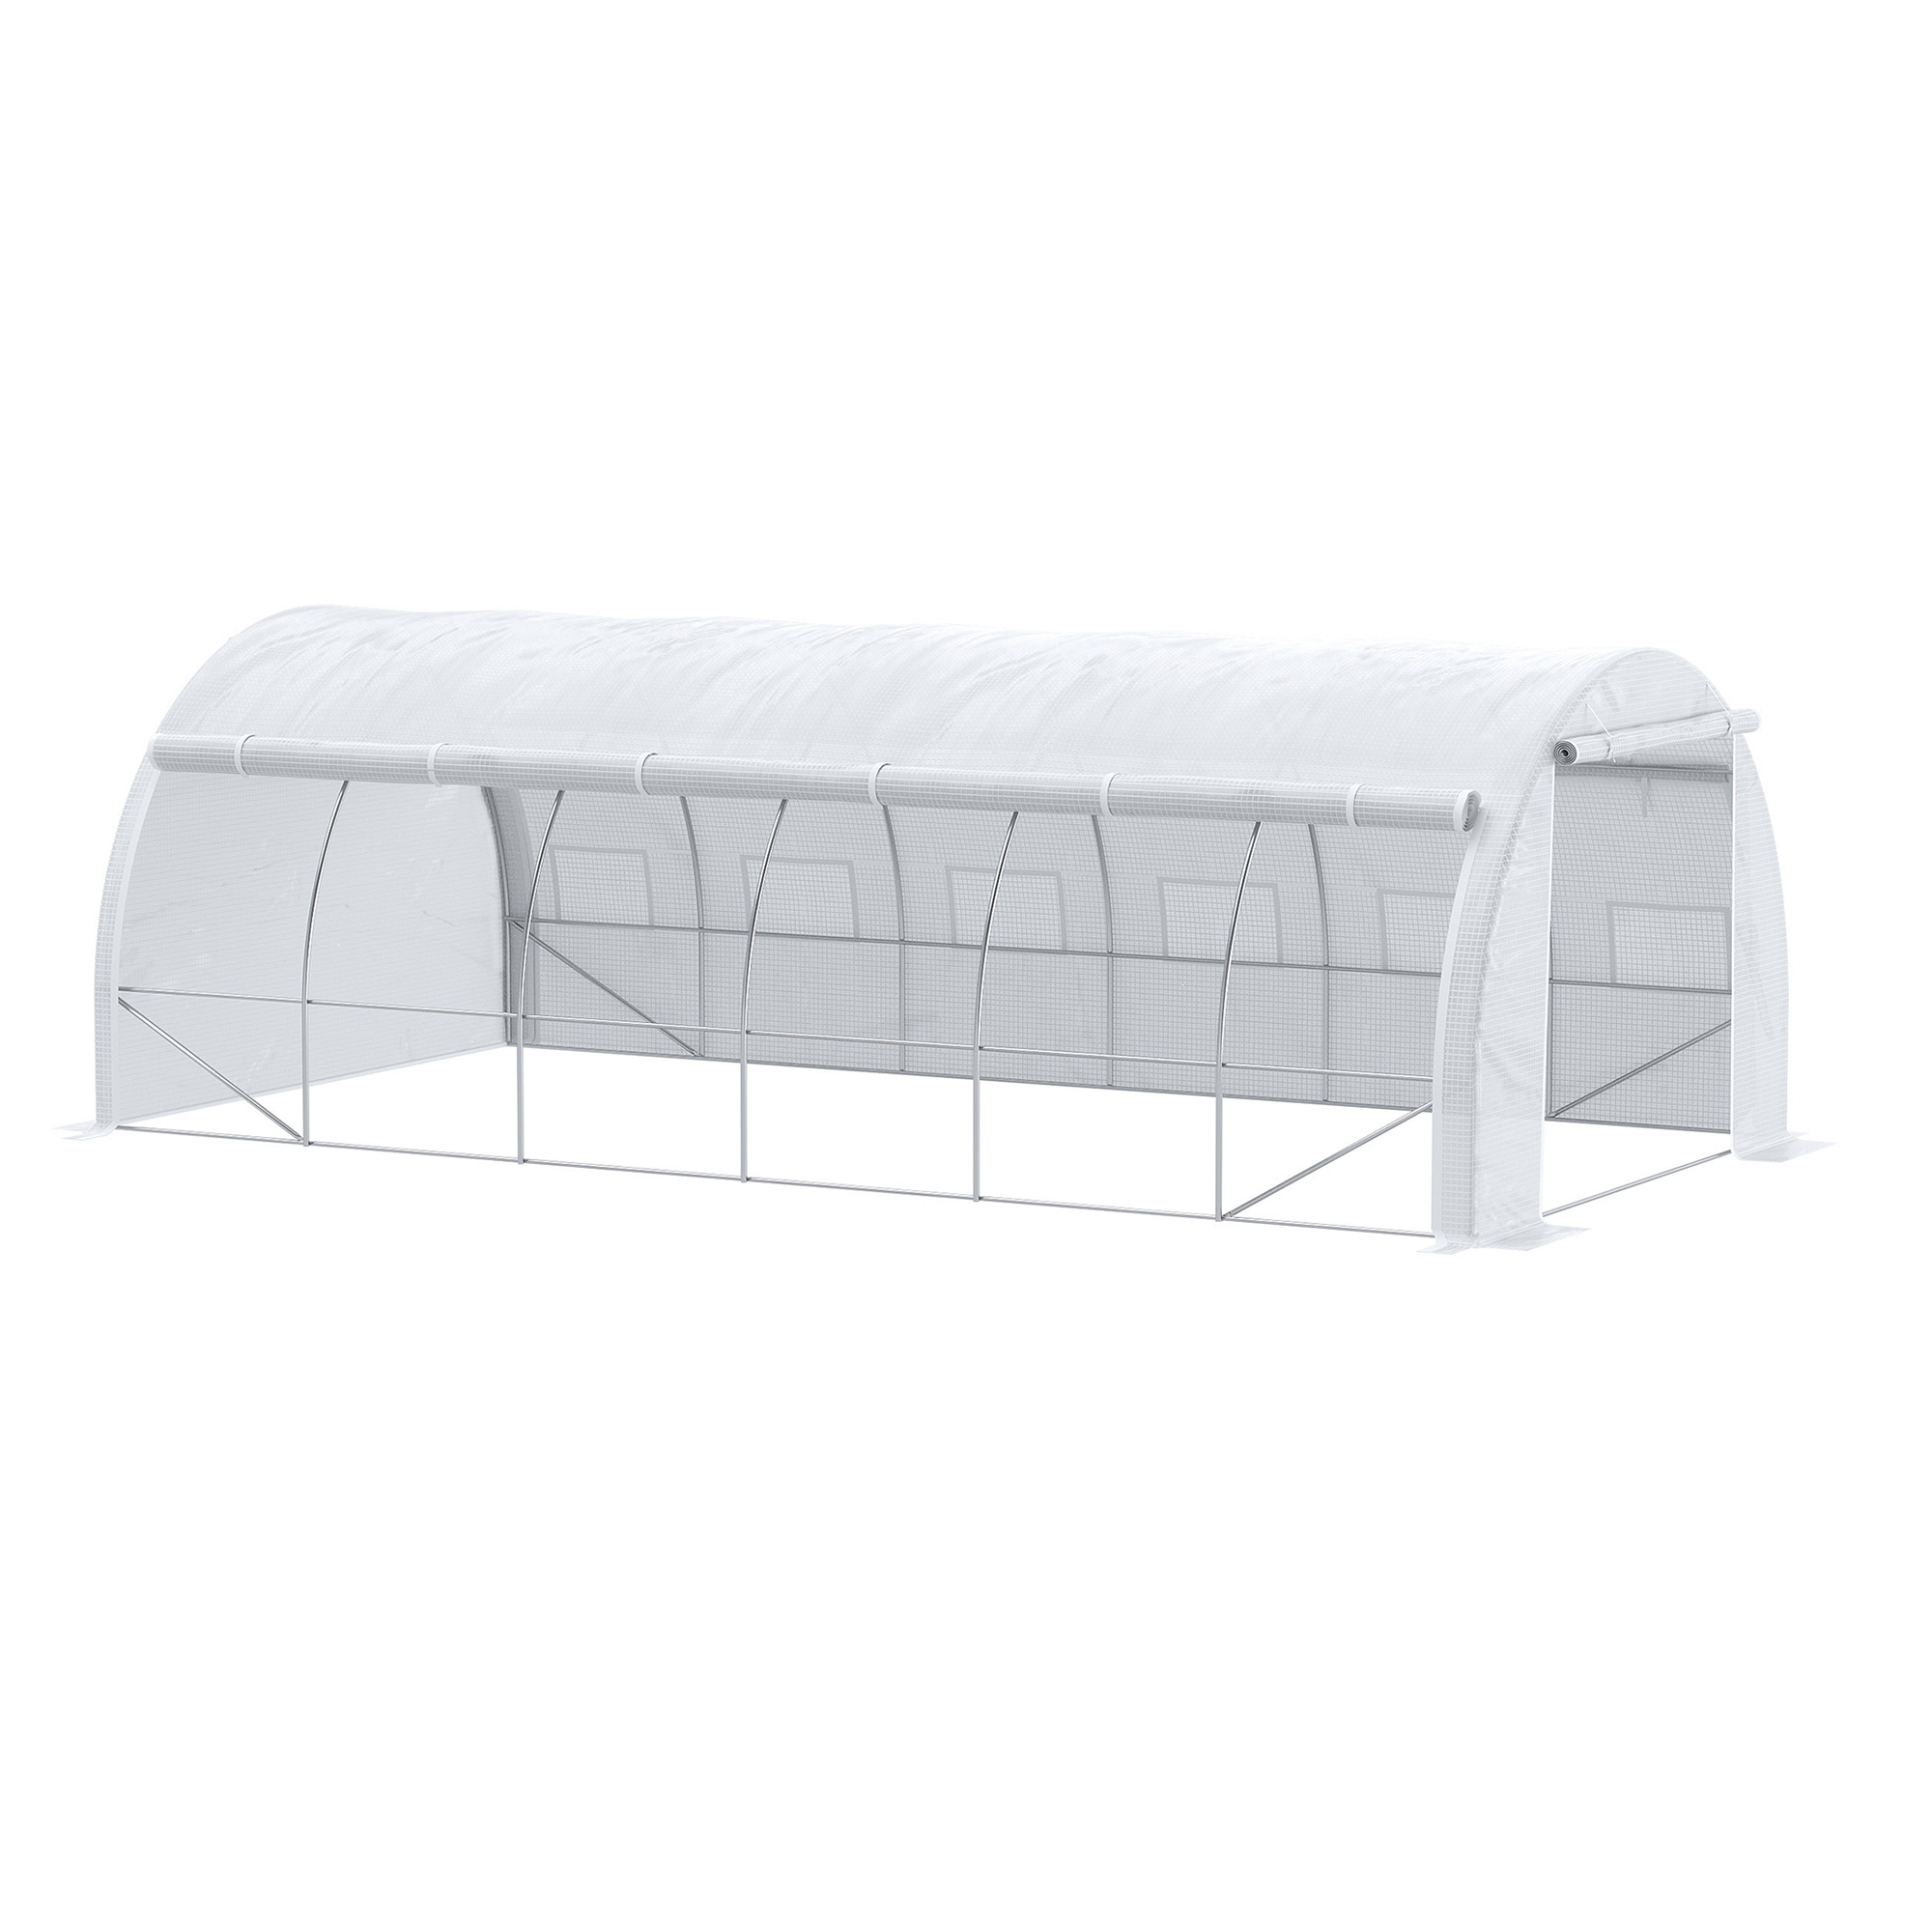 Outsunny 6 X 3 X 2 M Polytunnel Greenhouse, Walk In Pollytunnel Tent With Steel Frame, Reinforced Cover, Zippered Door And 8 Windows For Garden White